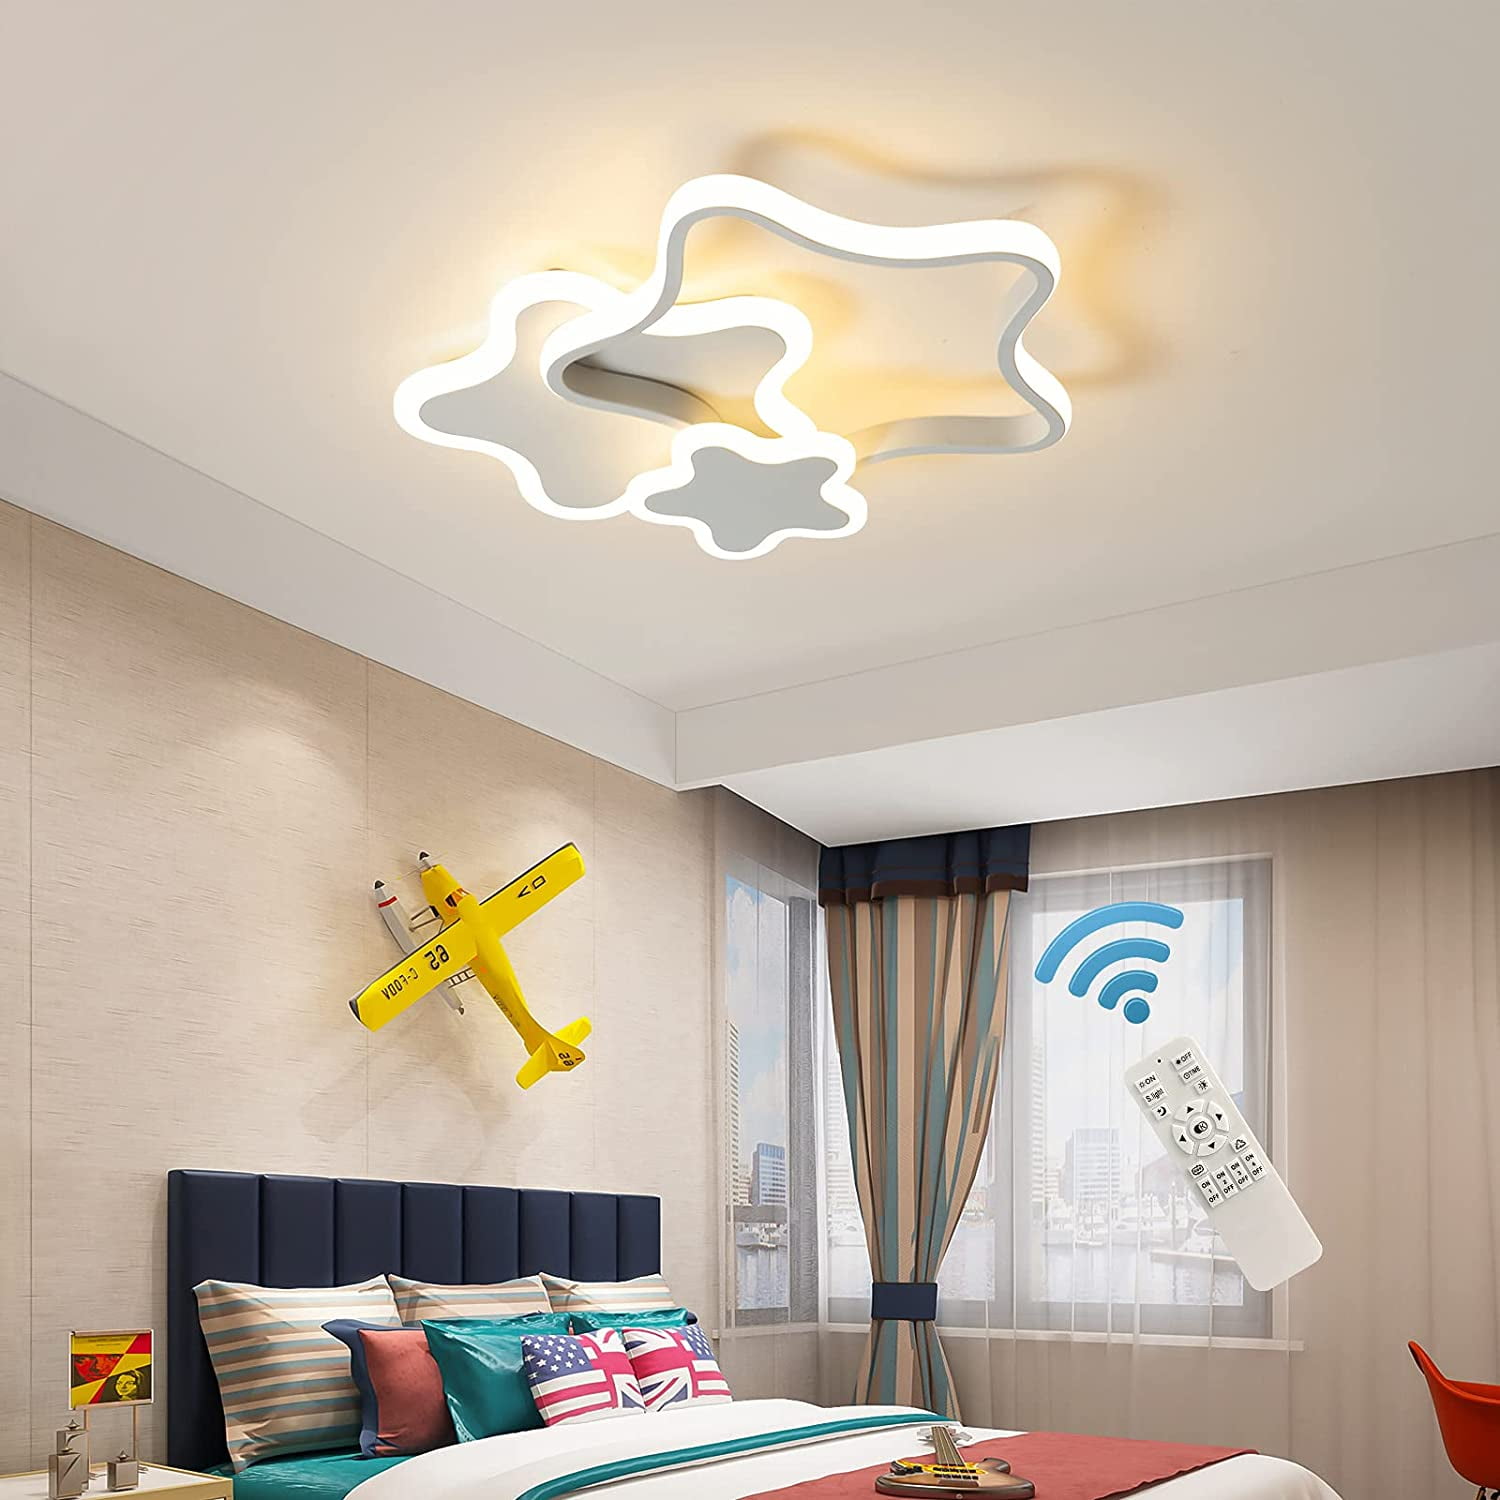 Garwarm Dimmable LED Lights, Modern Acrylic Shape Ceiling Lamp, Children Room Bedroom Living Room Flush Mount Chandelier Ceiling Lighting Fixtures with Remote, 32W/White - Walmart.com